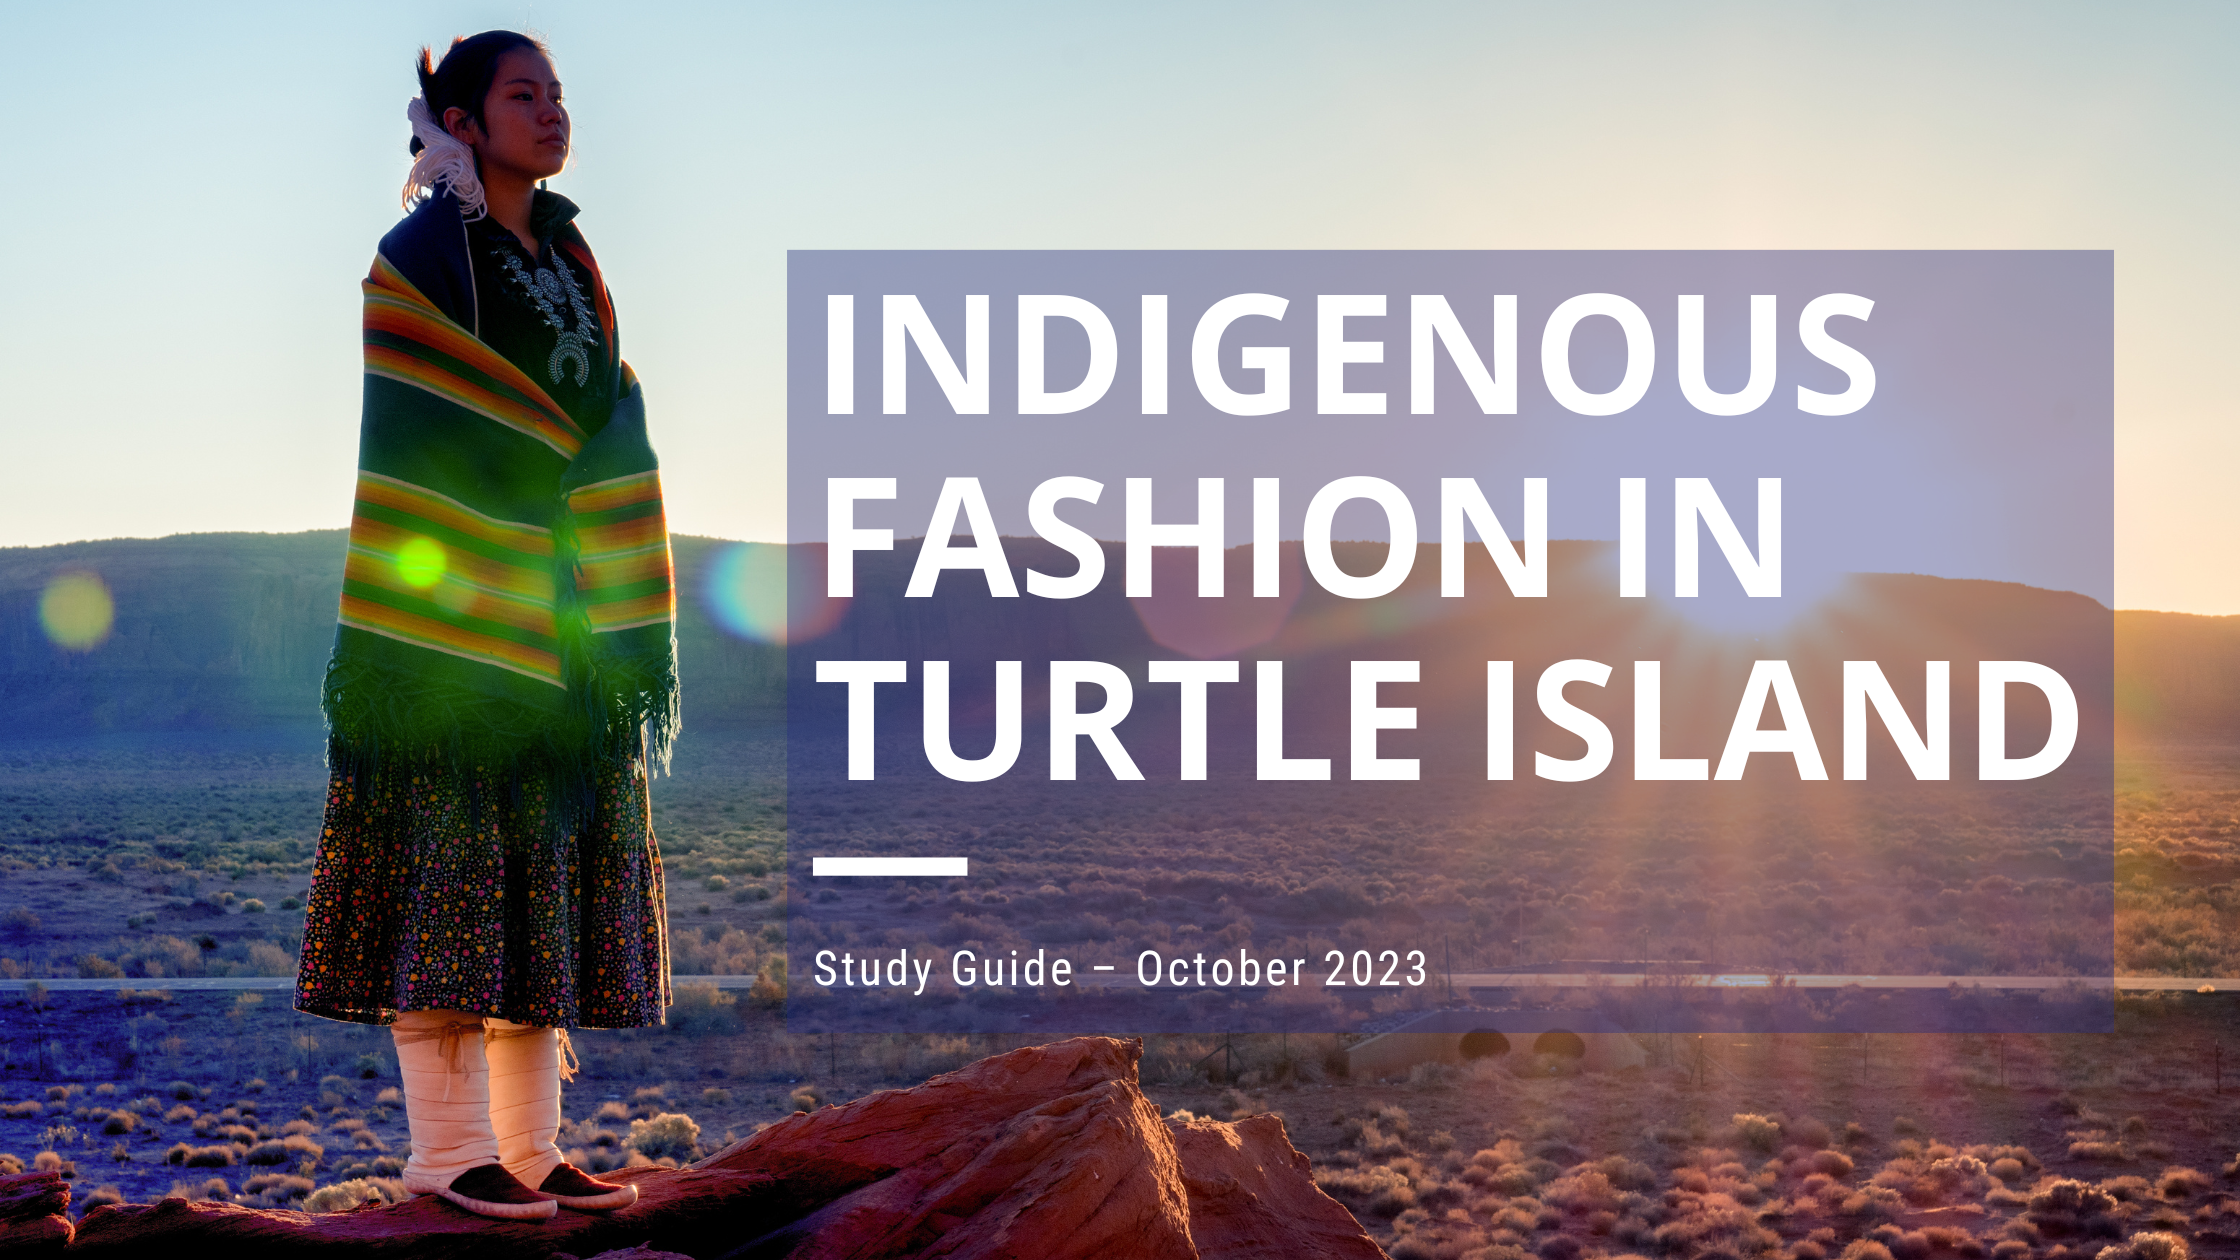 Study guide: Indigenous fashion in Turtle Island